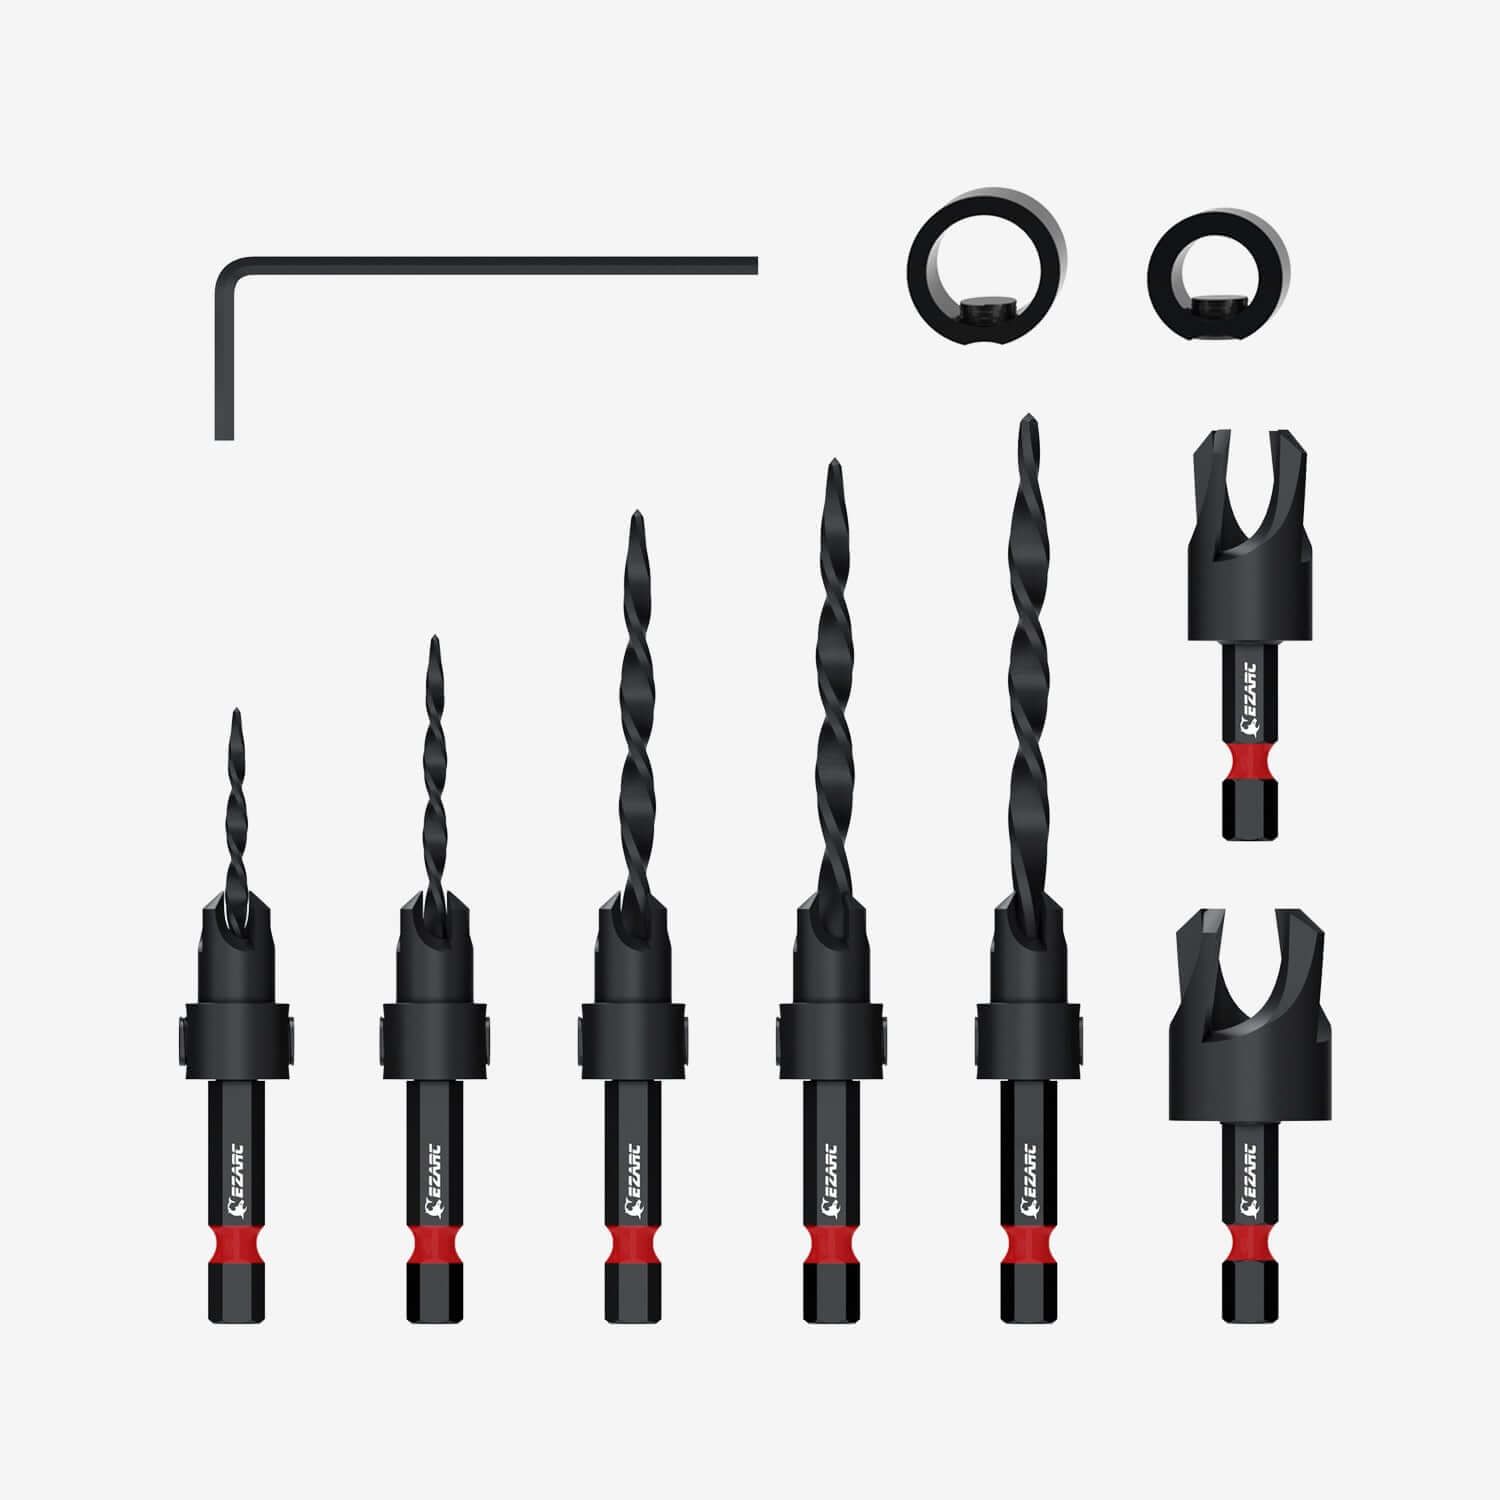 Wood Countersink Drill Bit Set With 1/4" Hex Shank0